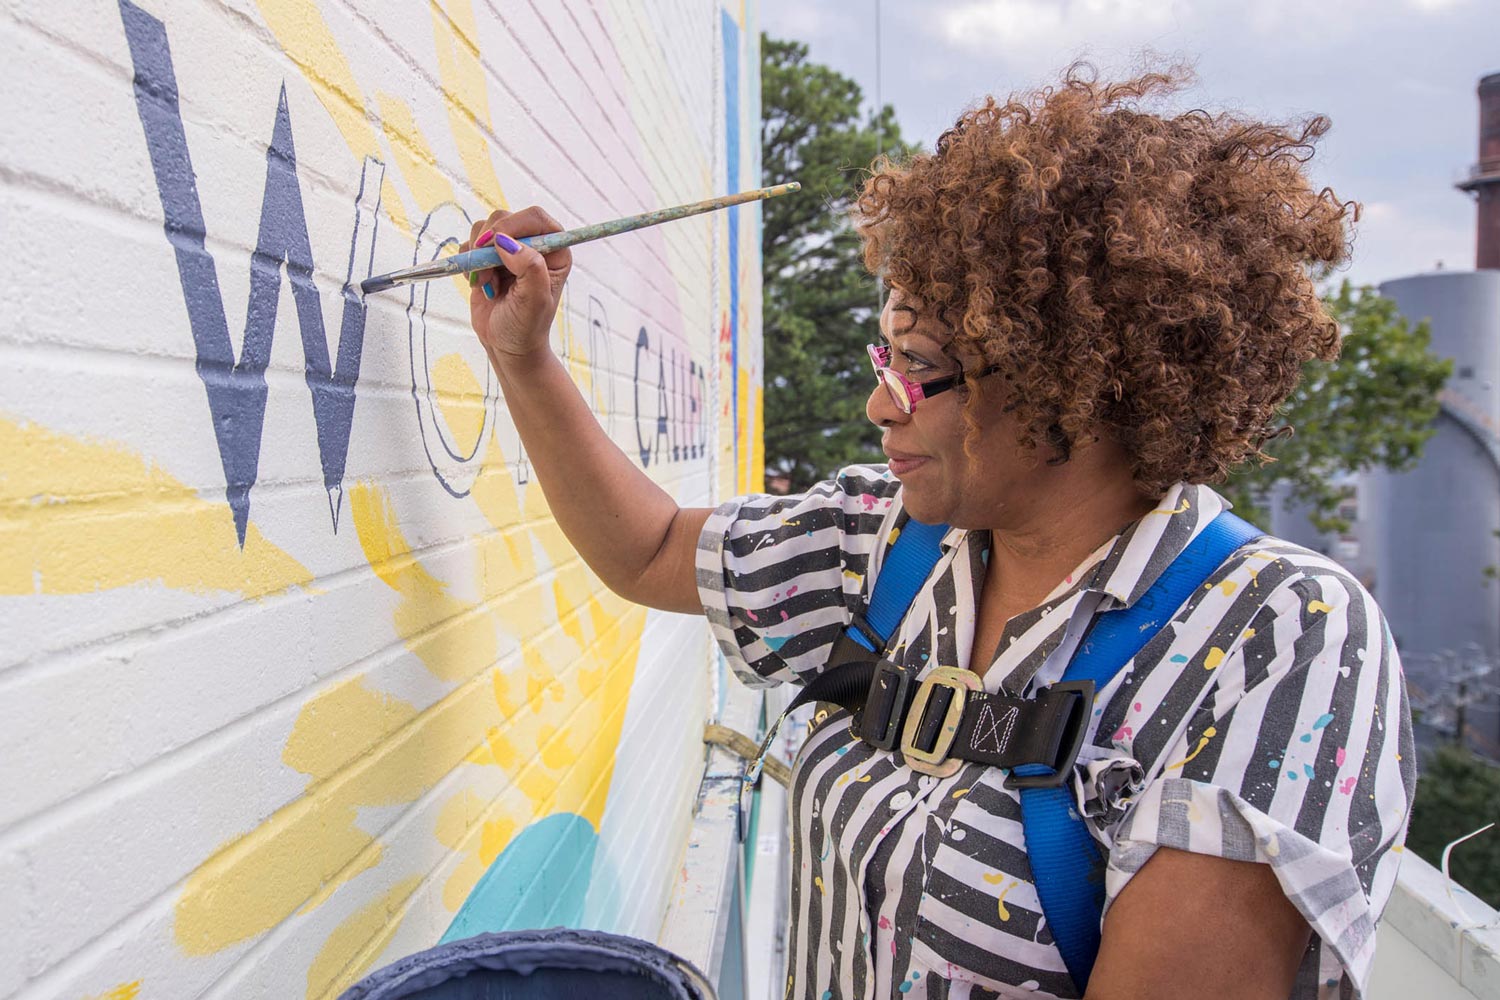 Rita Dove painting a wall on the outside of a building